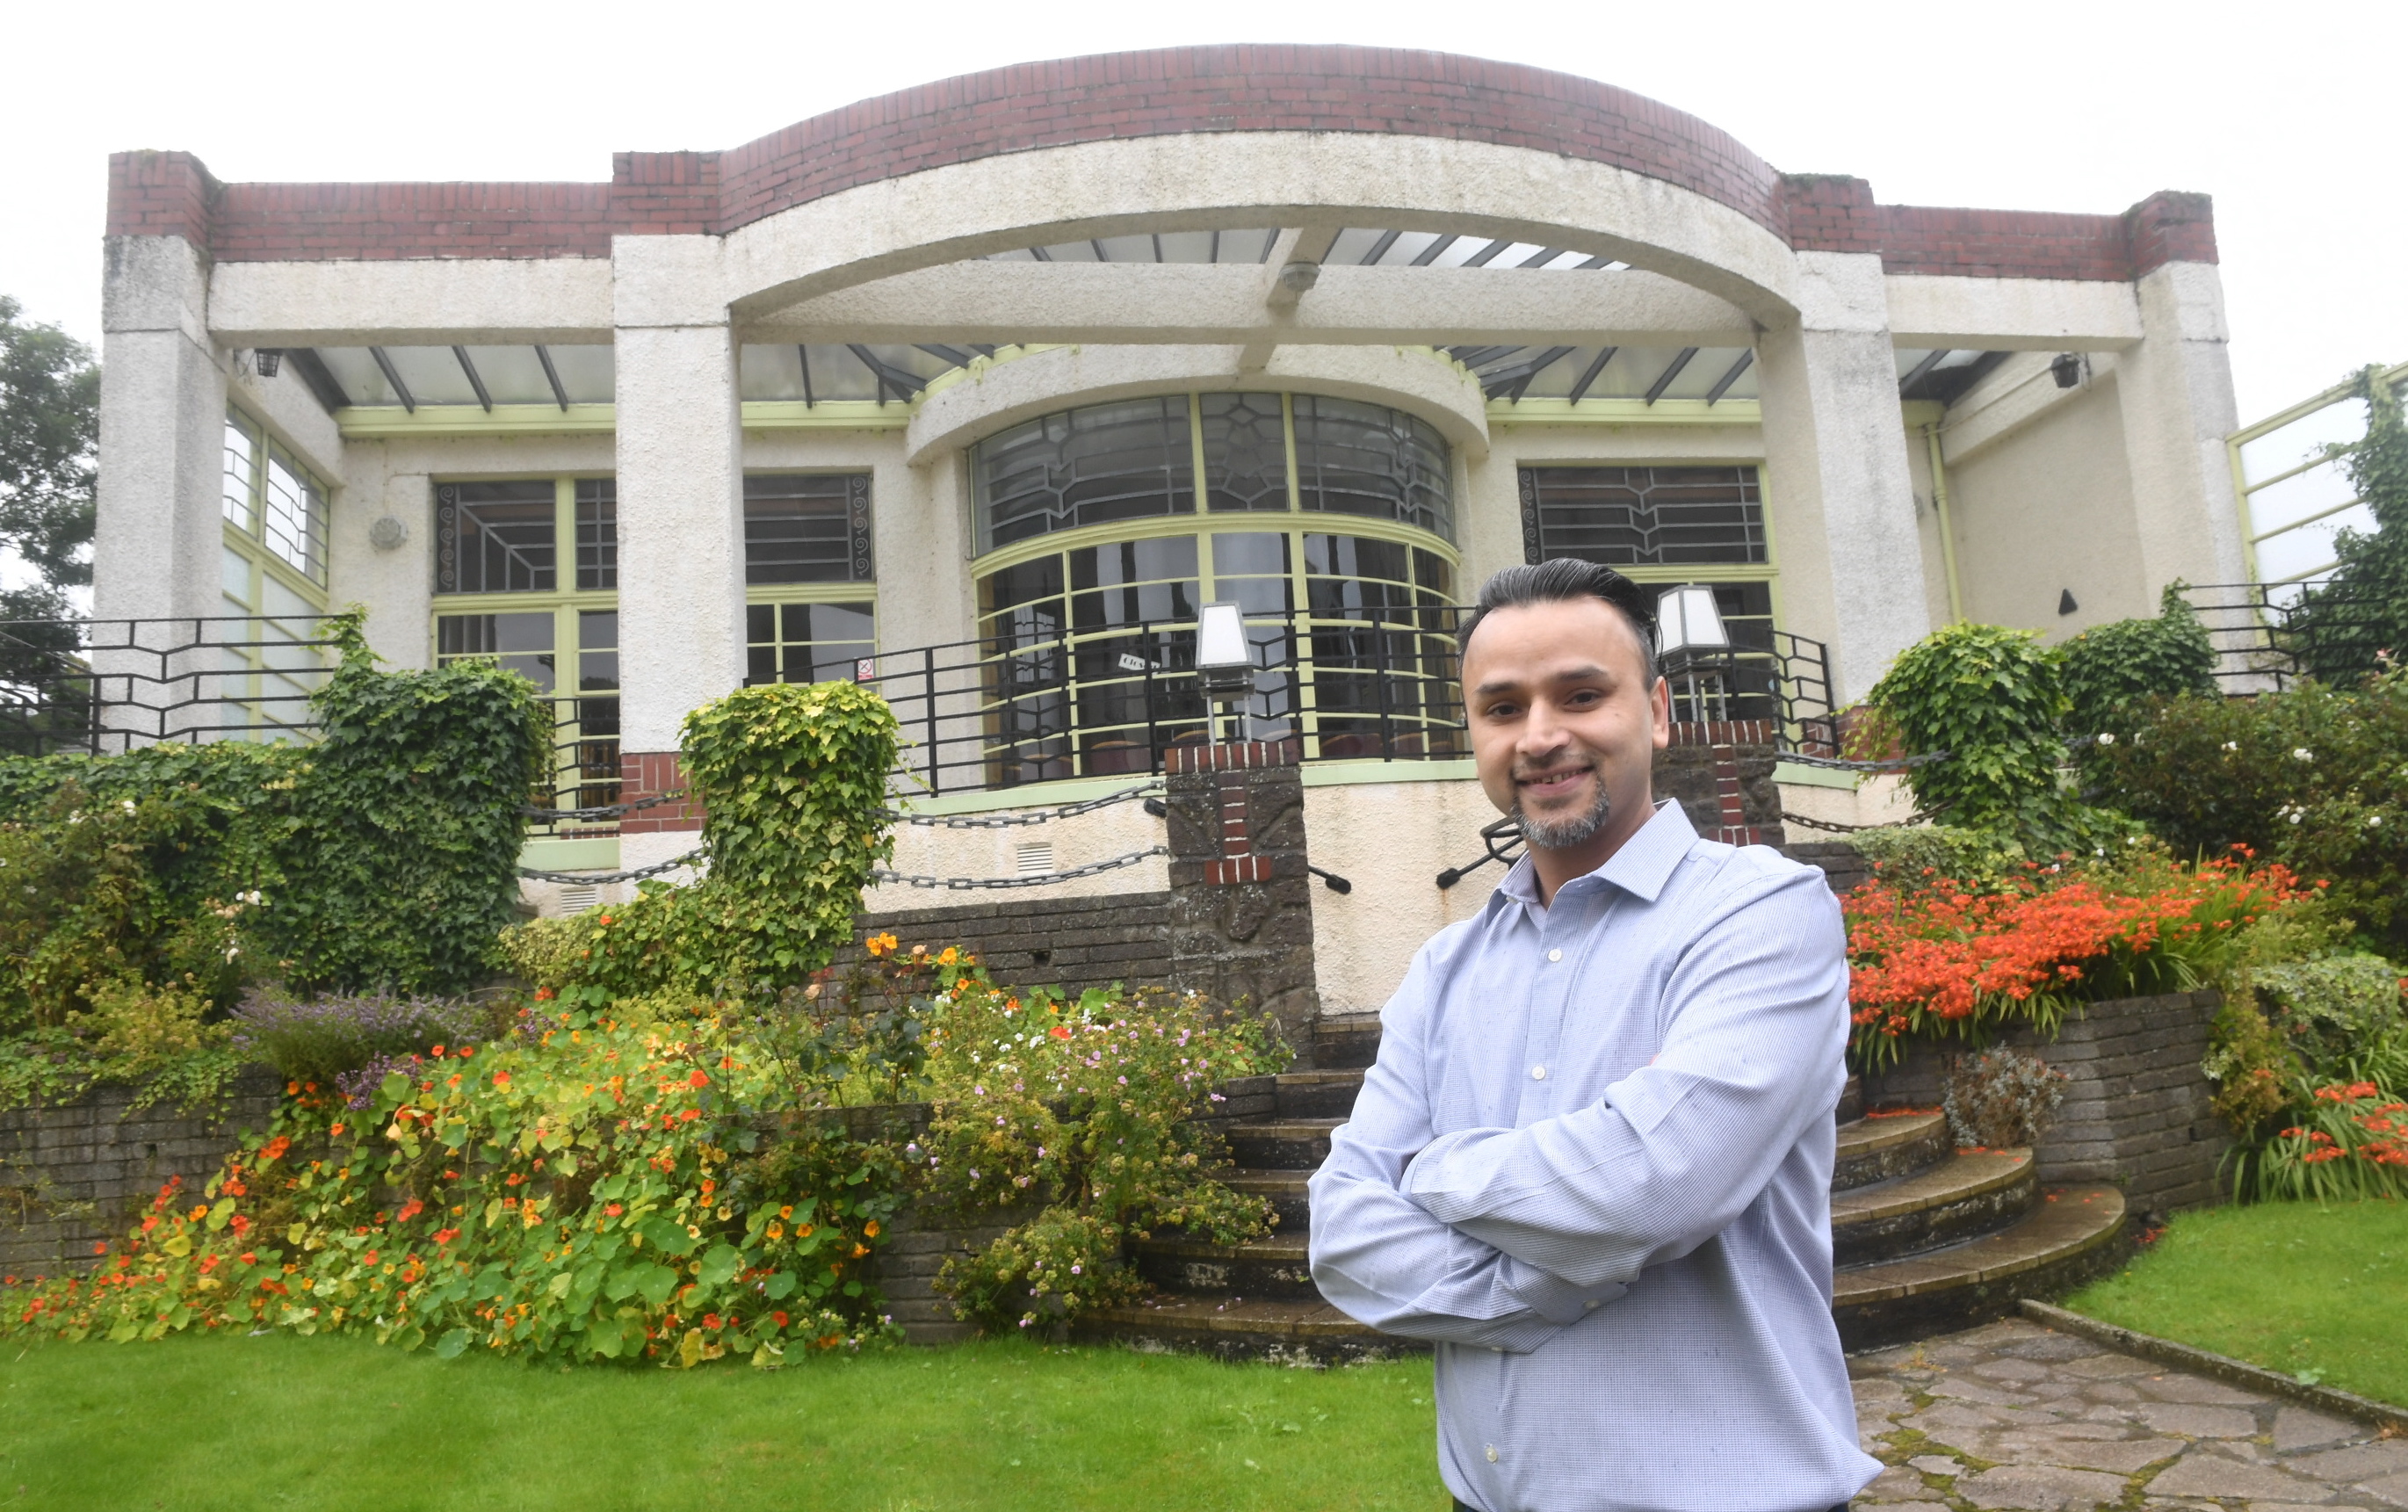 Mr Hamid has ambitious plans for the former Carron restaurant in Stonehaven.